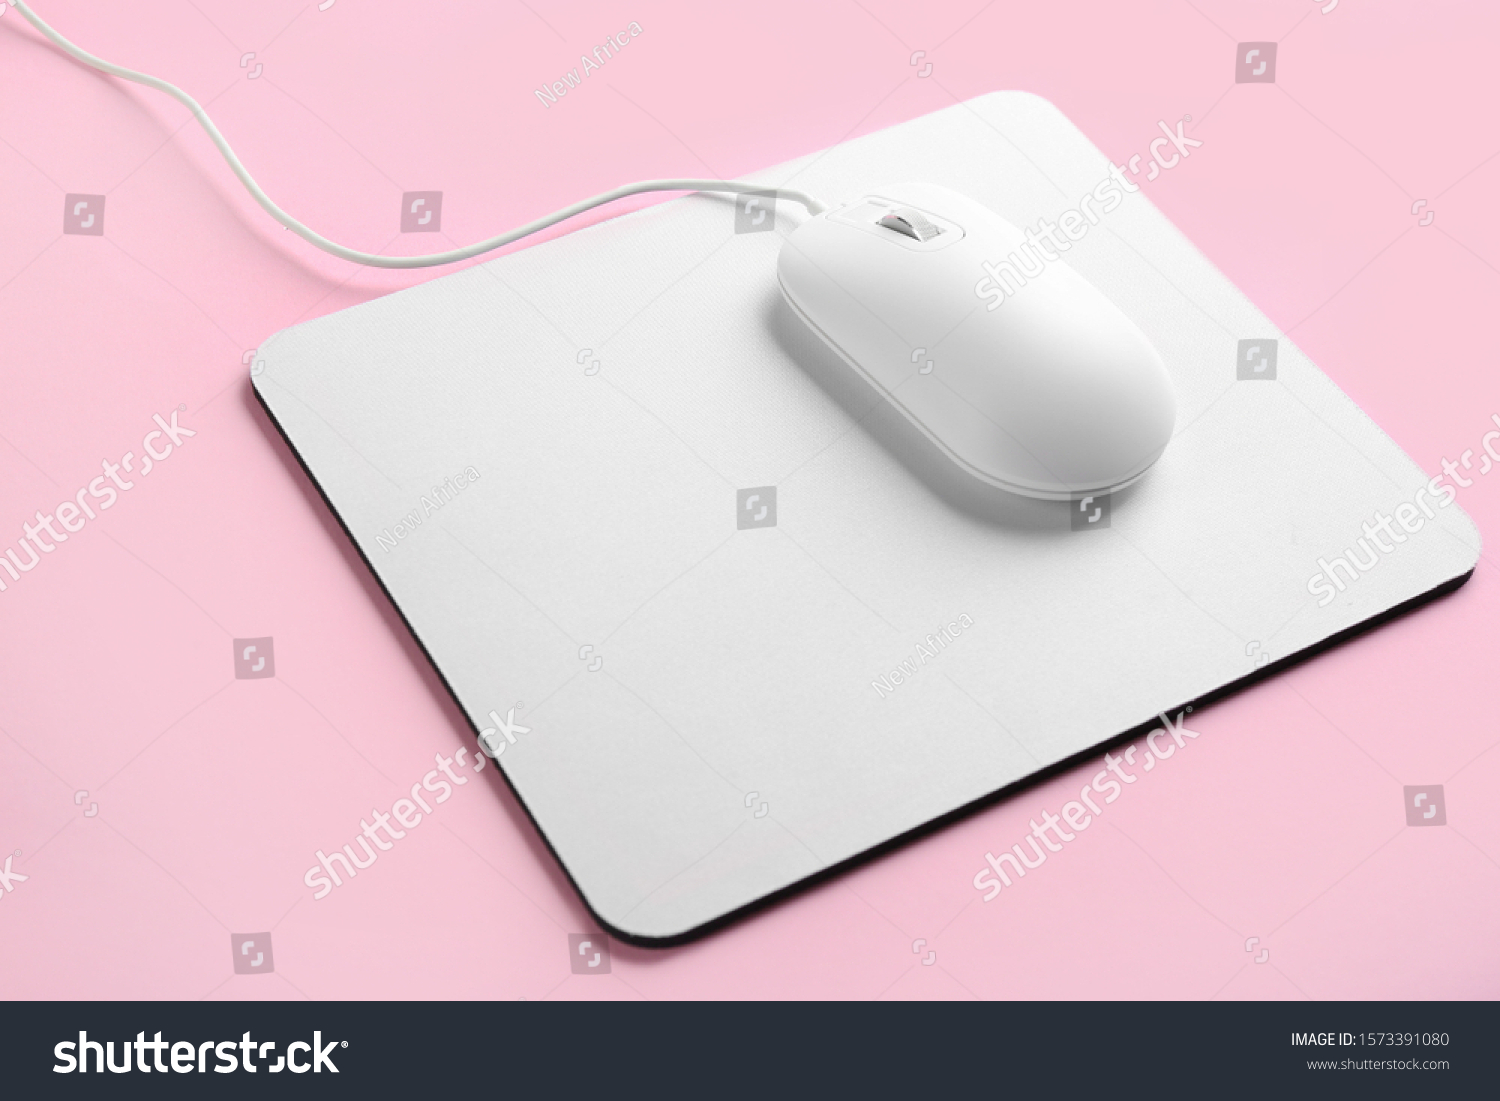 Modern wired optical mouse and pad on pink background #1573391080